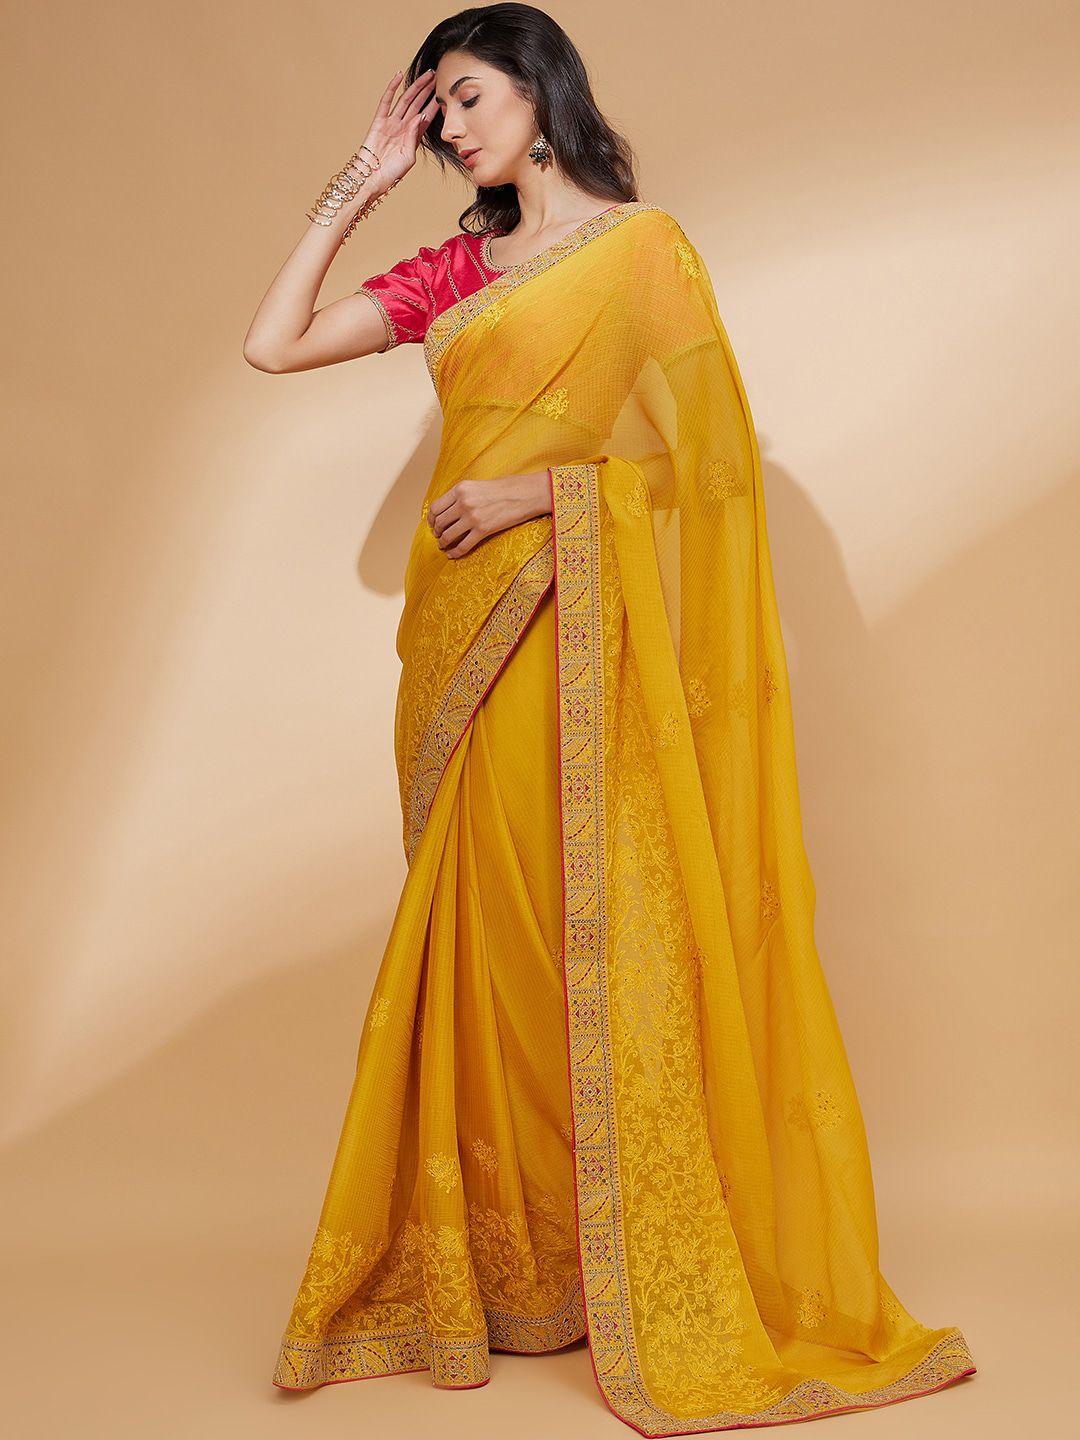 all about you yellow & fuchsia floral embroidered pure chiffon saree